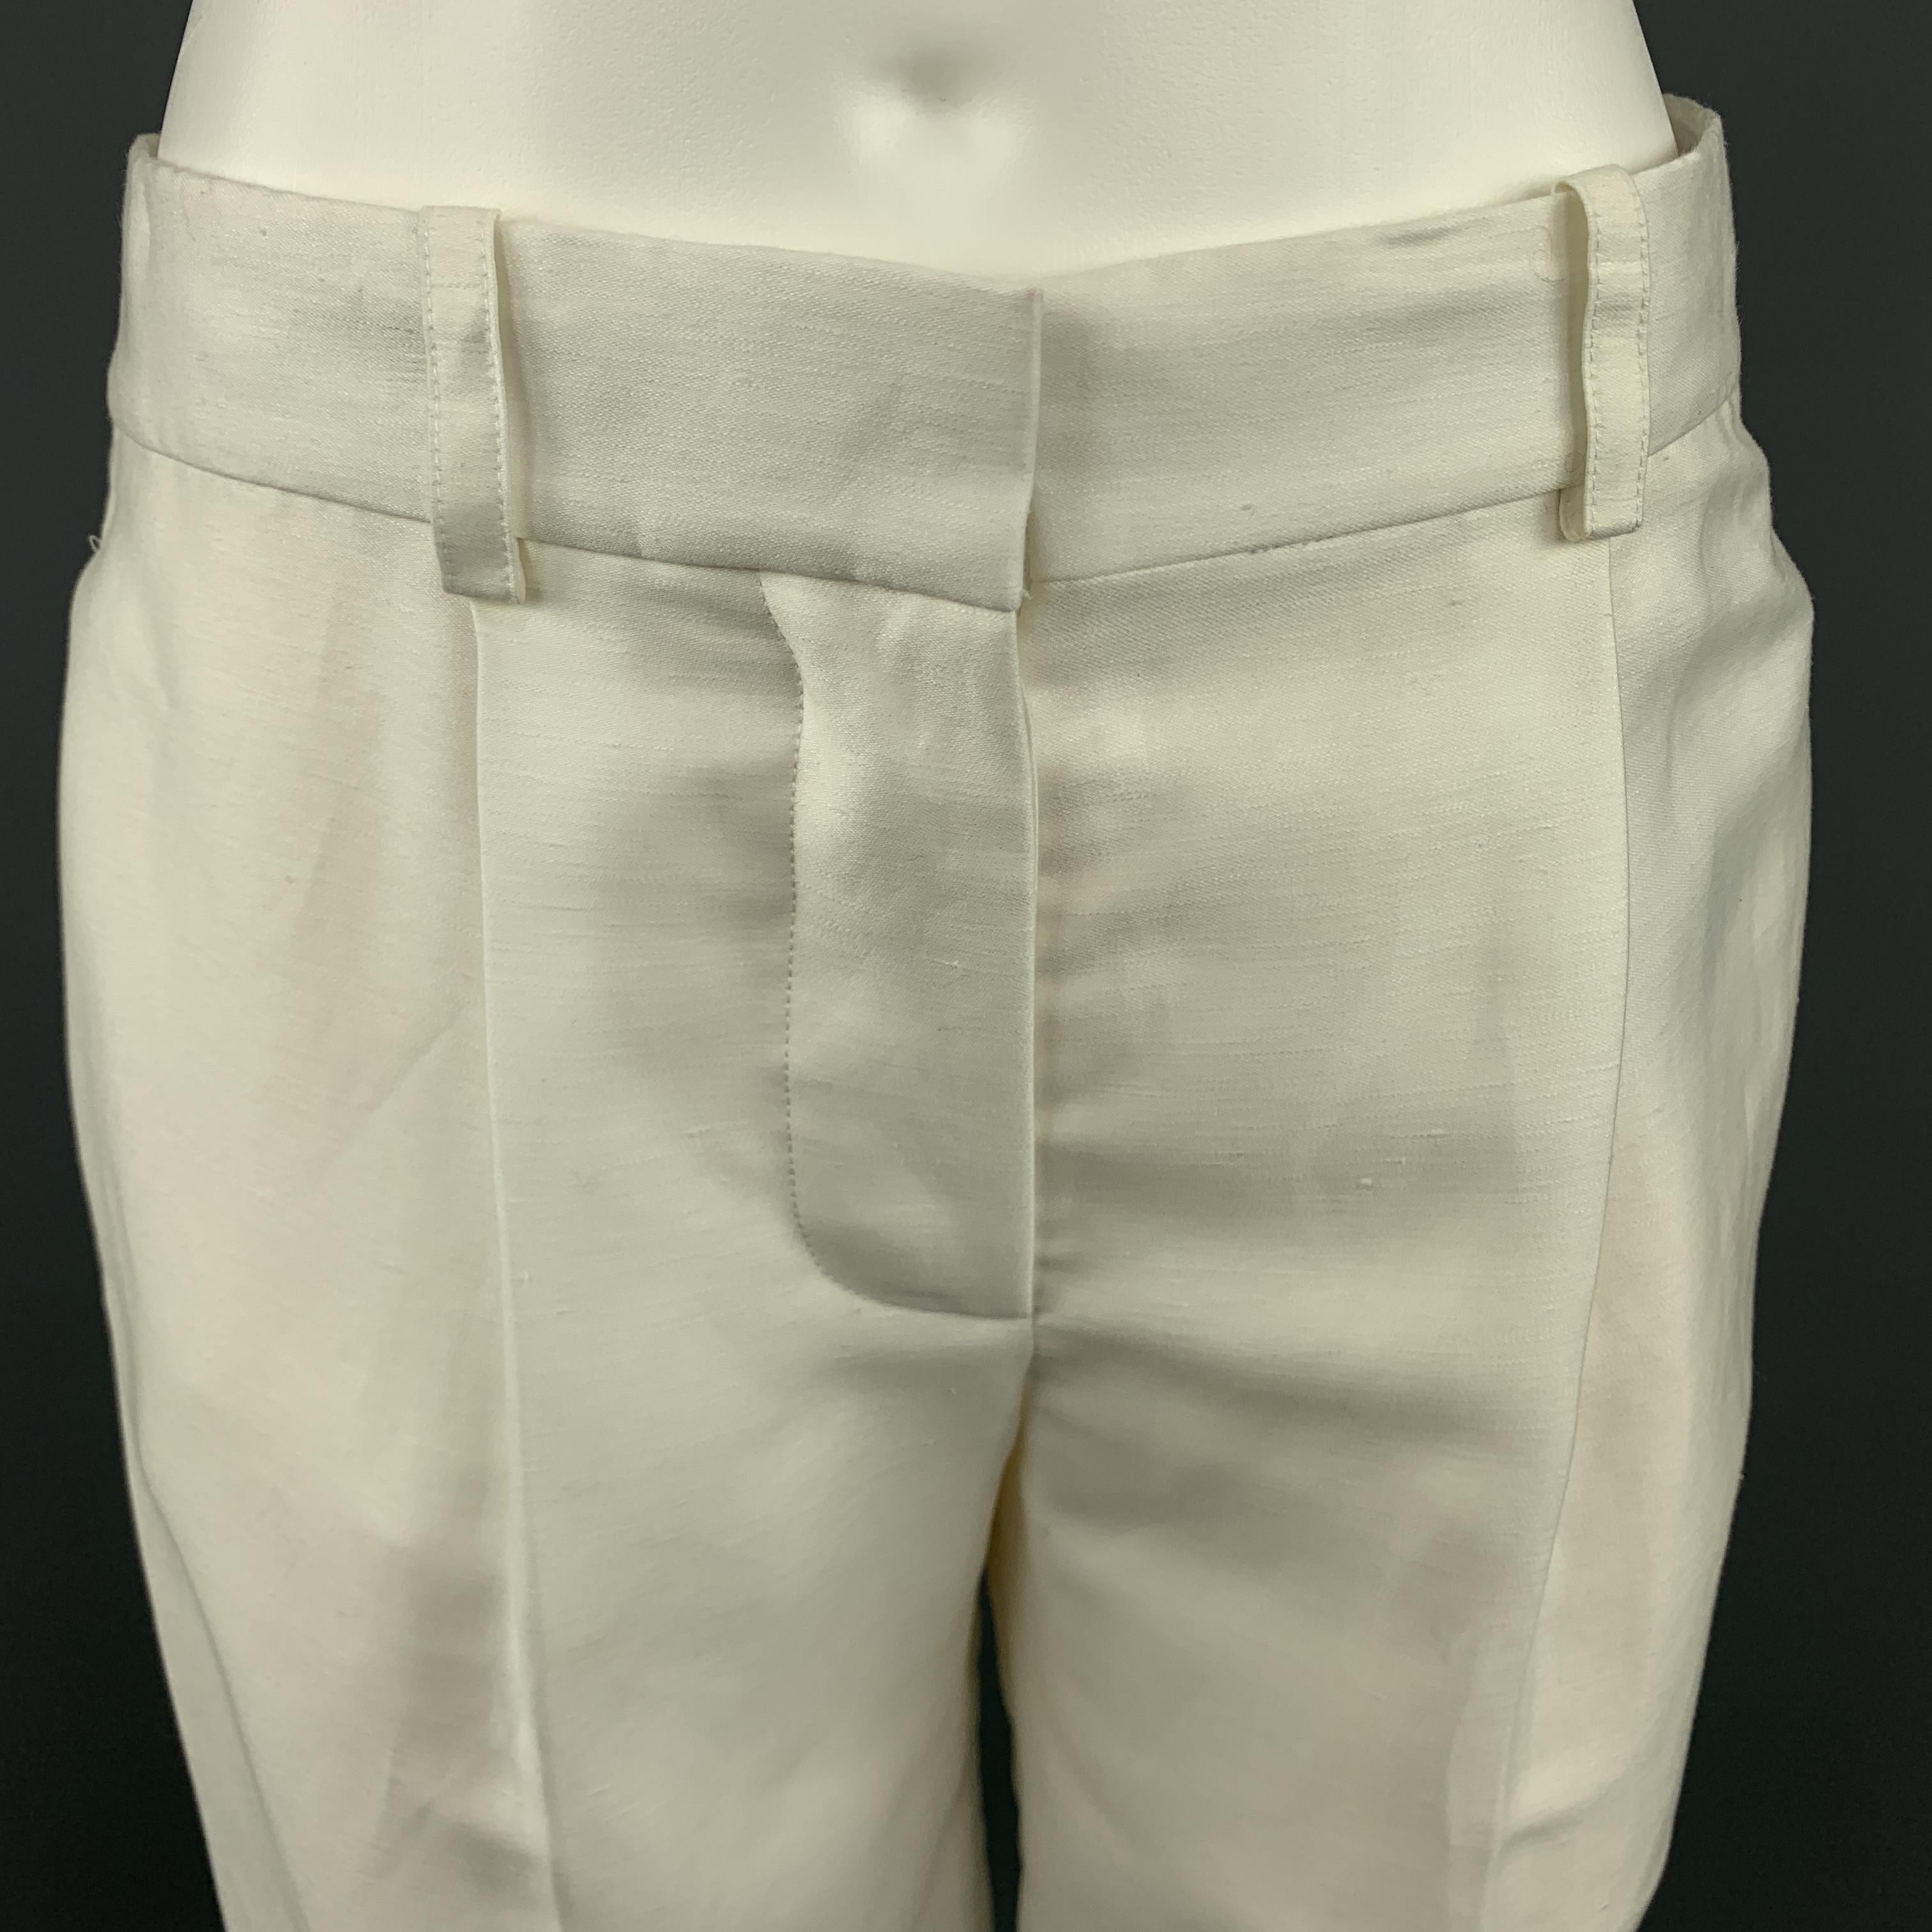 CHLOE Shorts comes in a cream tone in a solid silk material, with a pleated front, seam side pockets and a slit pocket at back. Made in France.
 
Excellent Pre-Owned Condition.
Marked: FR 34
 
Measurements:
 
Waist: 29 in.
Rise: 9.5 in.
Inseam: 11